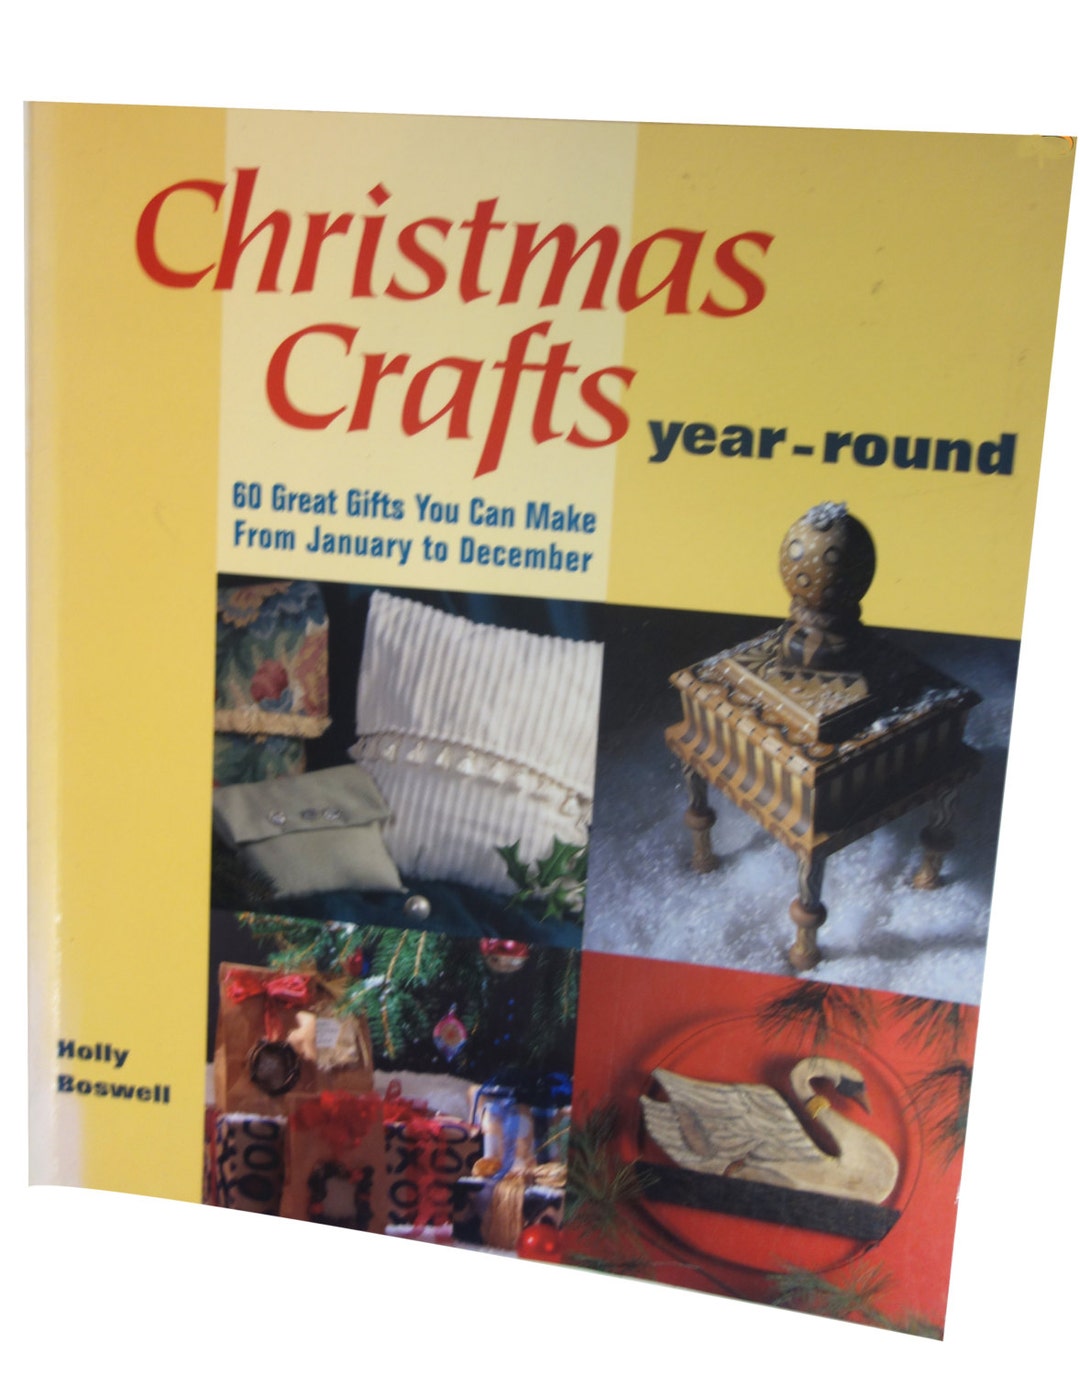 CHRISTMAS CRAFTS Year Round by Holly Boswell 60 Projects - Etsy